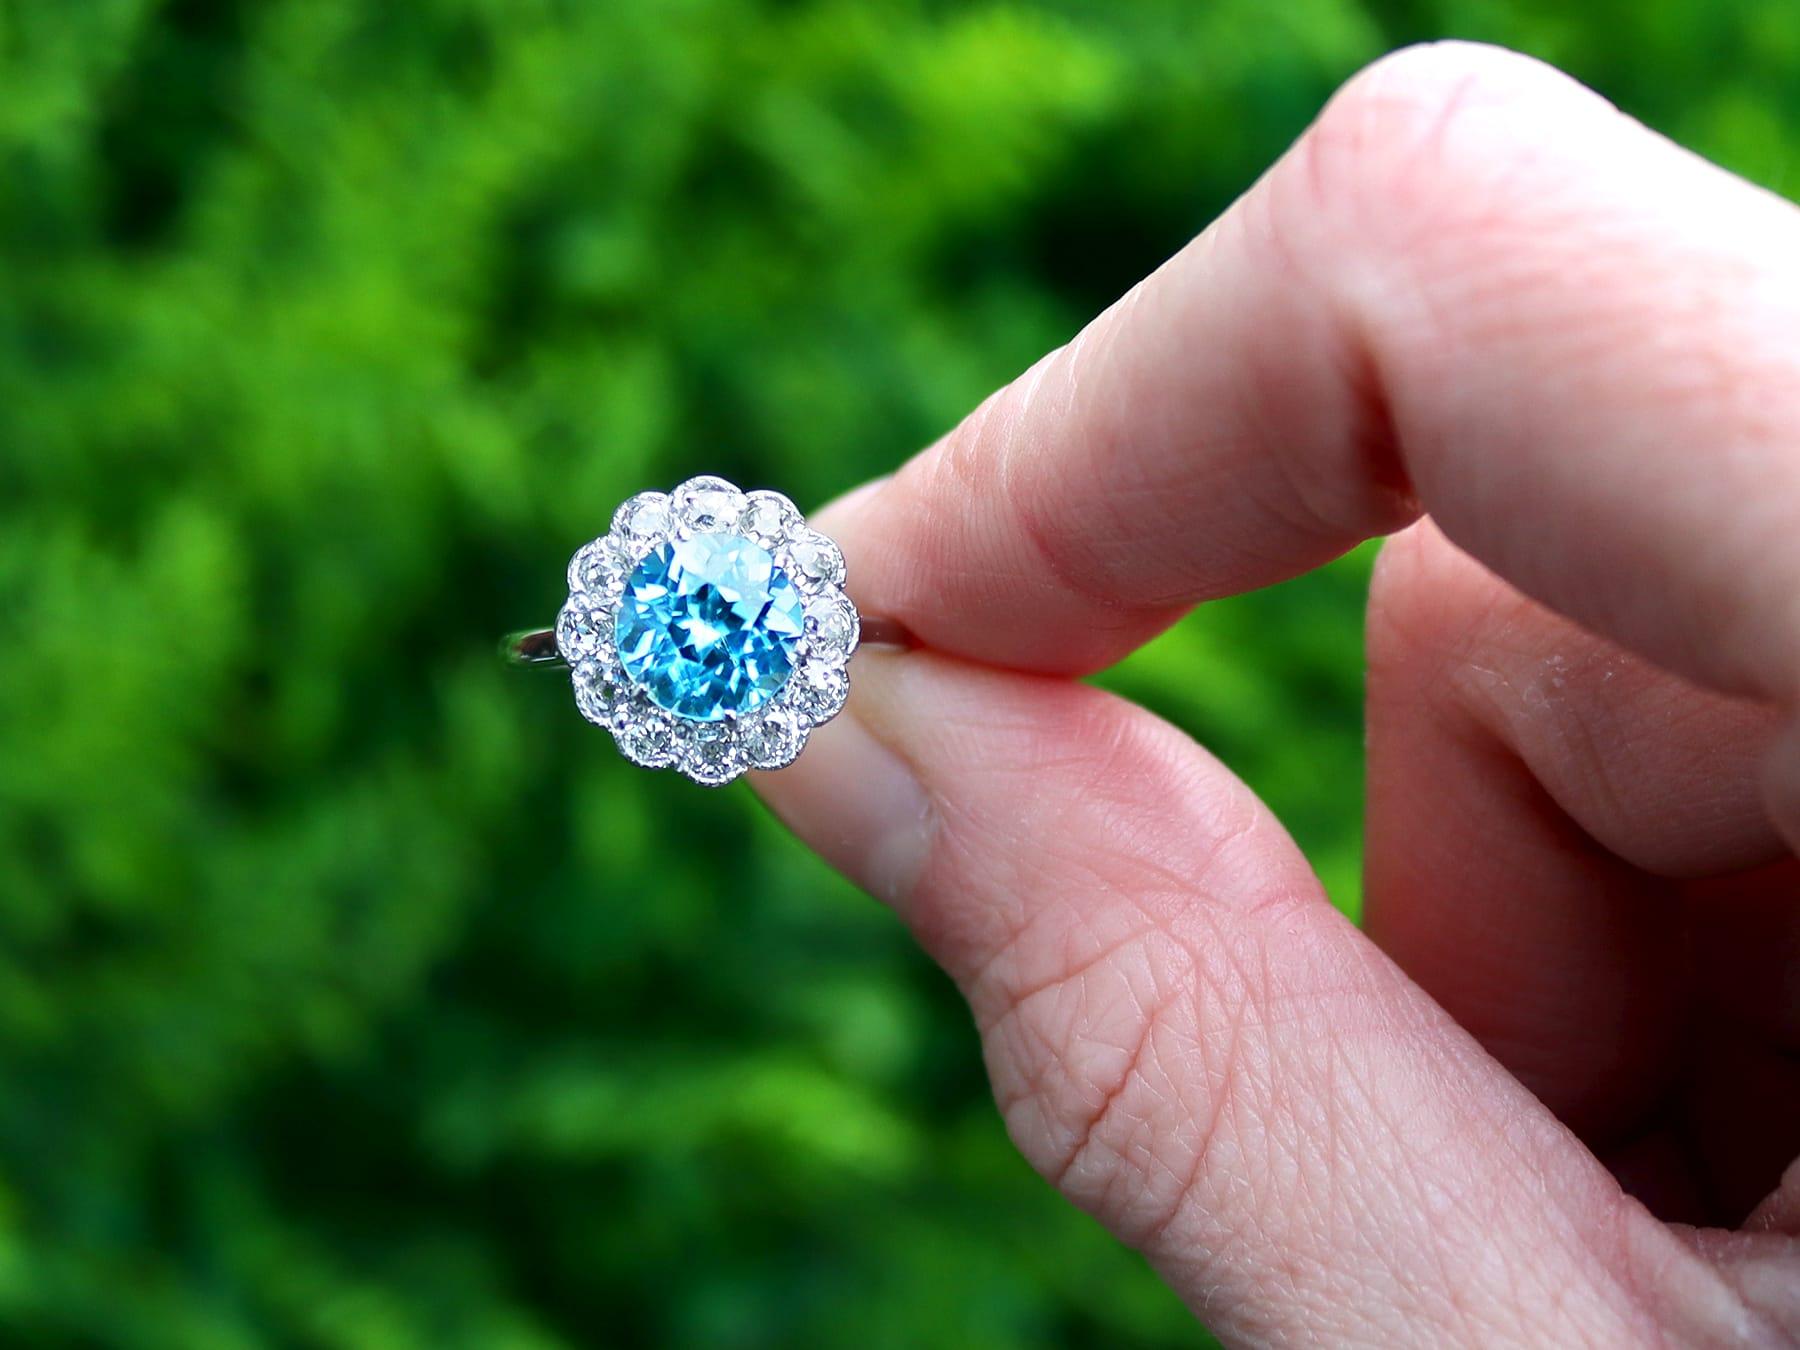 A stunning vintage 3.21 carat high zircon and 0.69 carat diamond, 18 karat white gold cluster style dress ring; part of diverse gemstone jewelry ring collections.

This stunning, fine and impressive zircon and diamond ring has been crafted in 18k